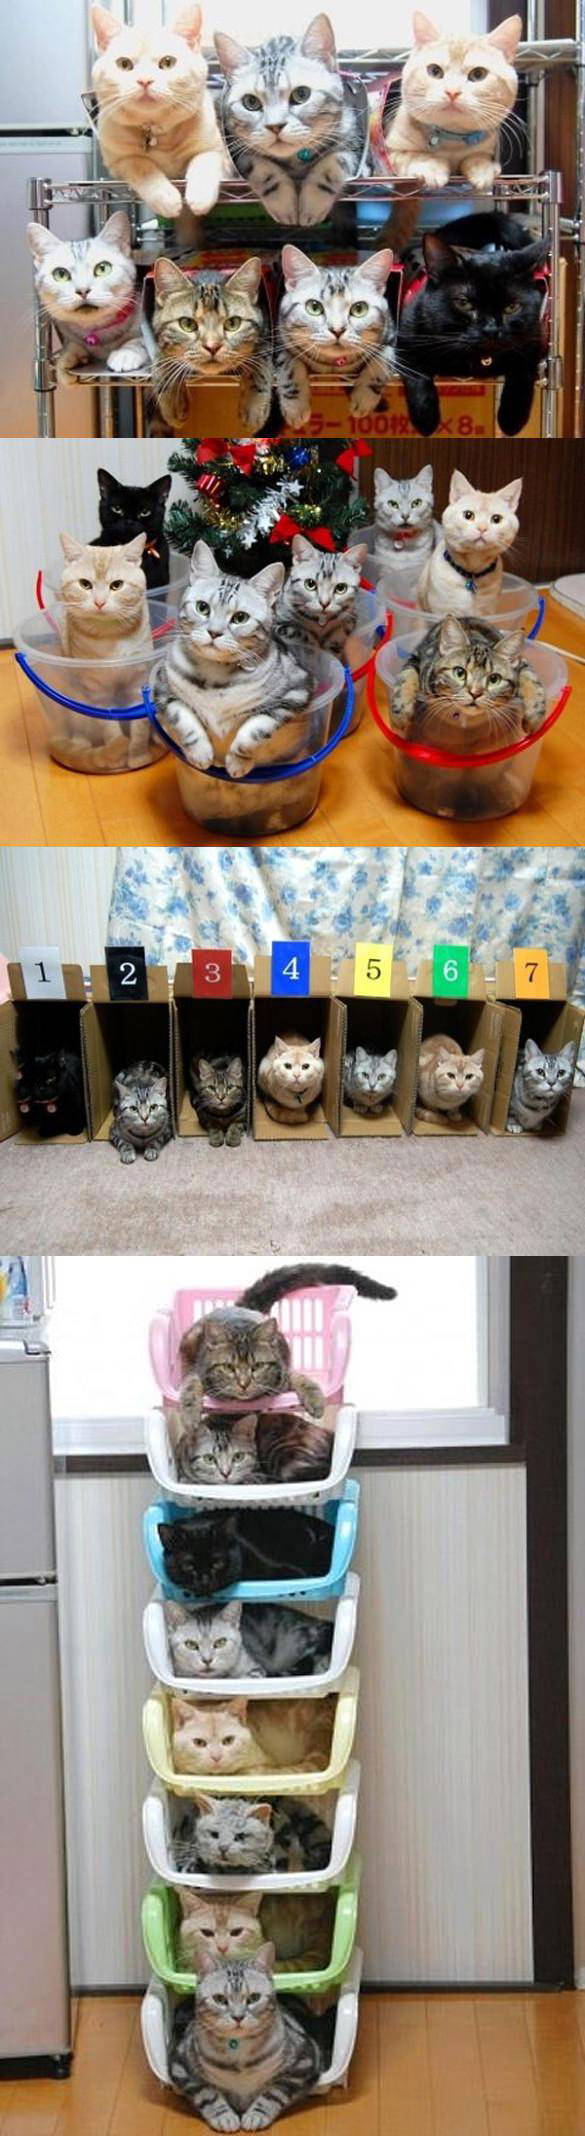 how to organize your cats